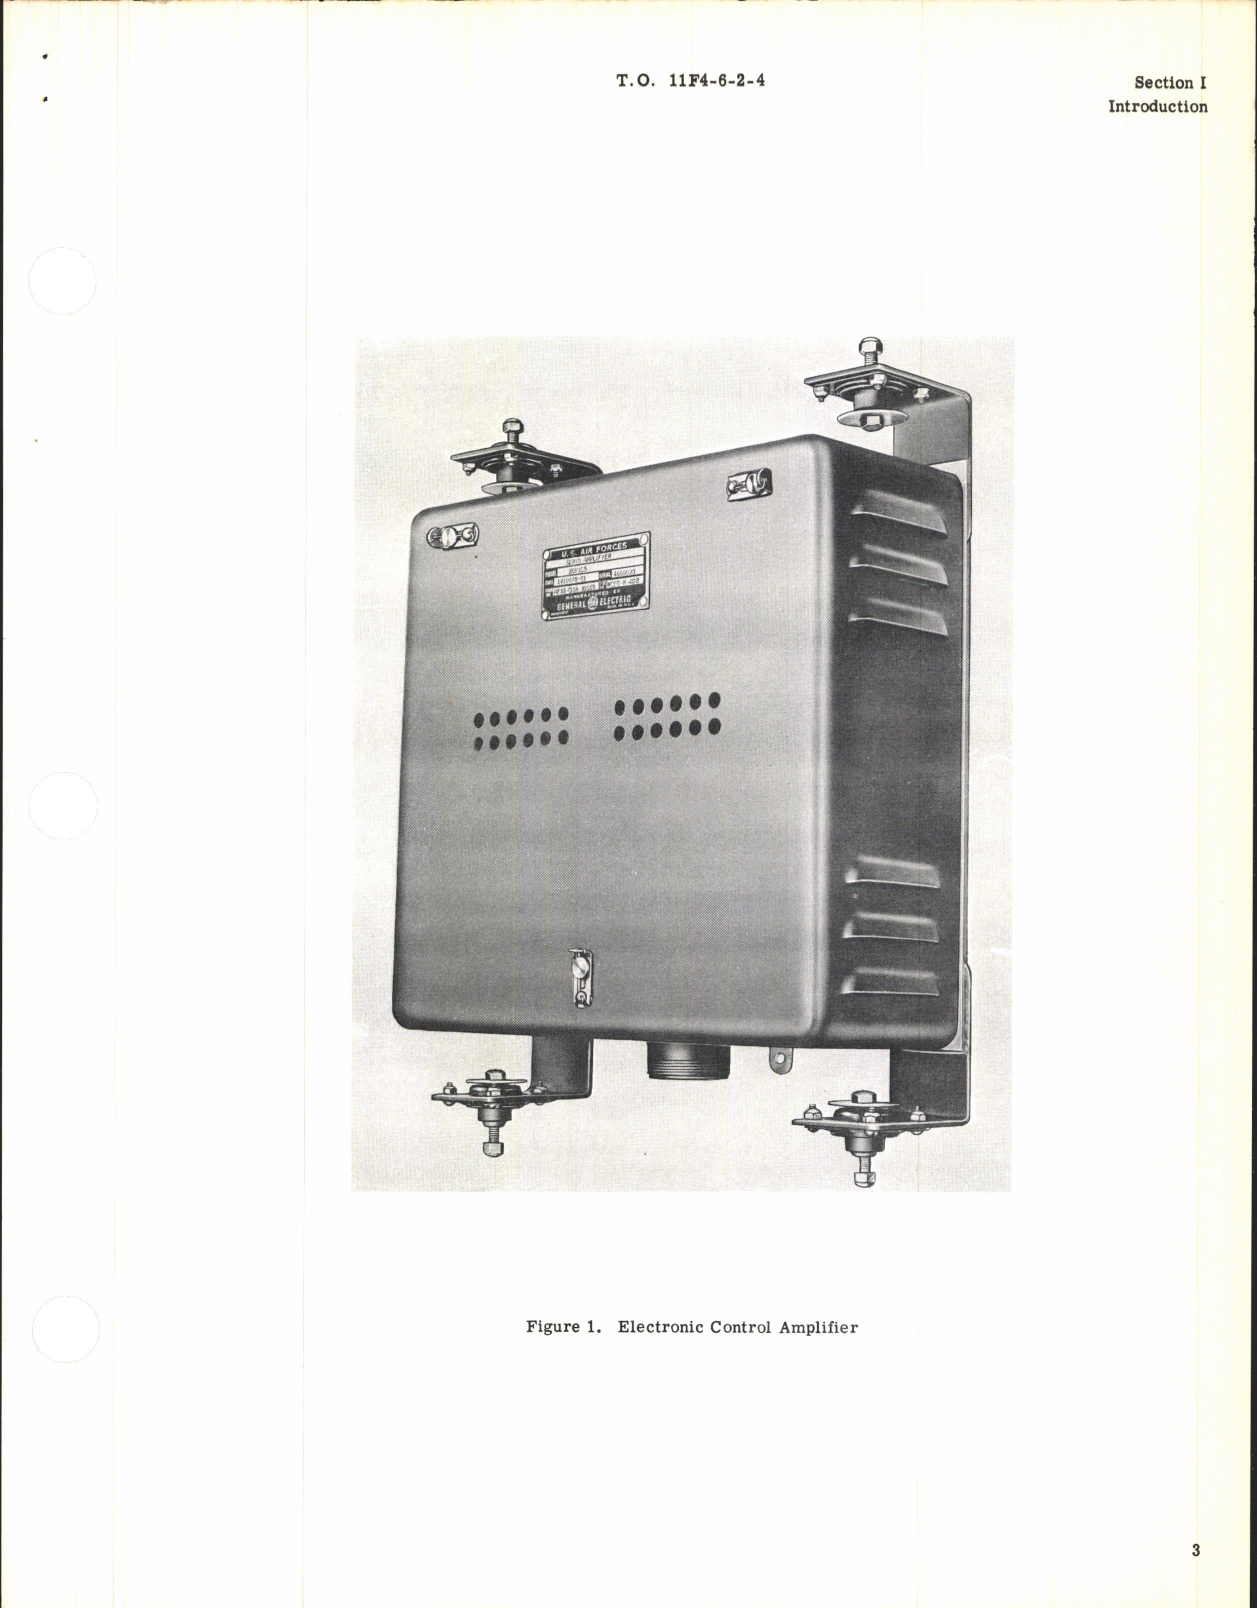 Sample page 5 from AirCorps Library document: Illustrated Parts Breakdown for Electronic Control Amplifier Model 2CV1C3 Part No. 141D678G1